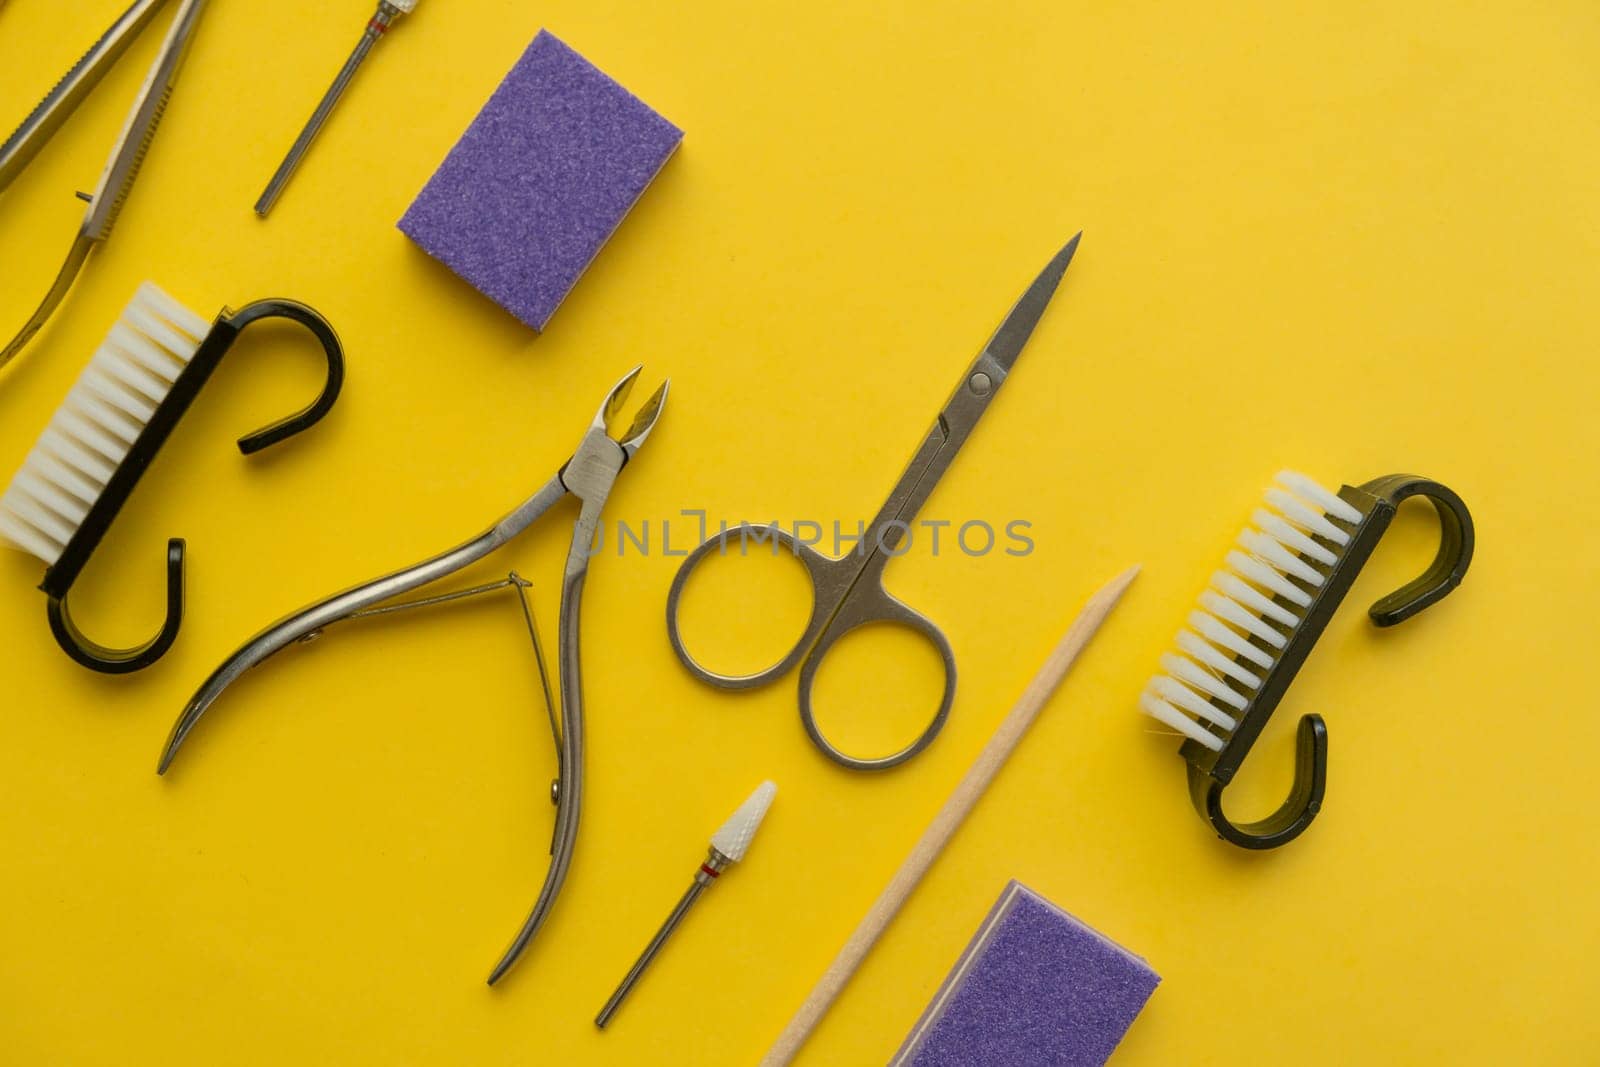 Professional manicure tools on yellow background. Manicure set. Top view. Cuticle pusher, cuticle trimmer and purpose scissor. Set of manicure and pedicure tools and cosmetics with space